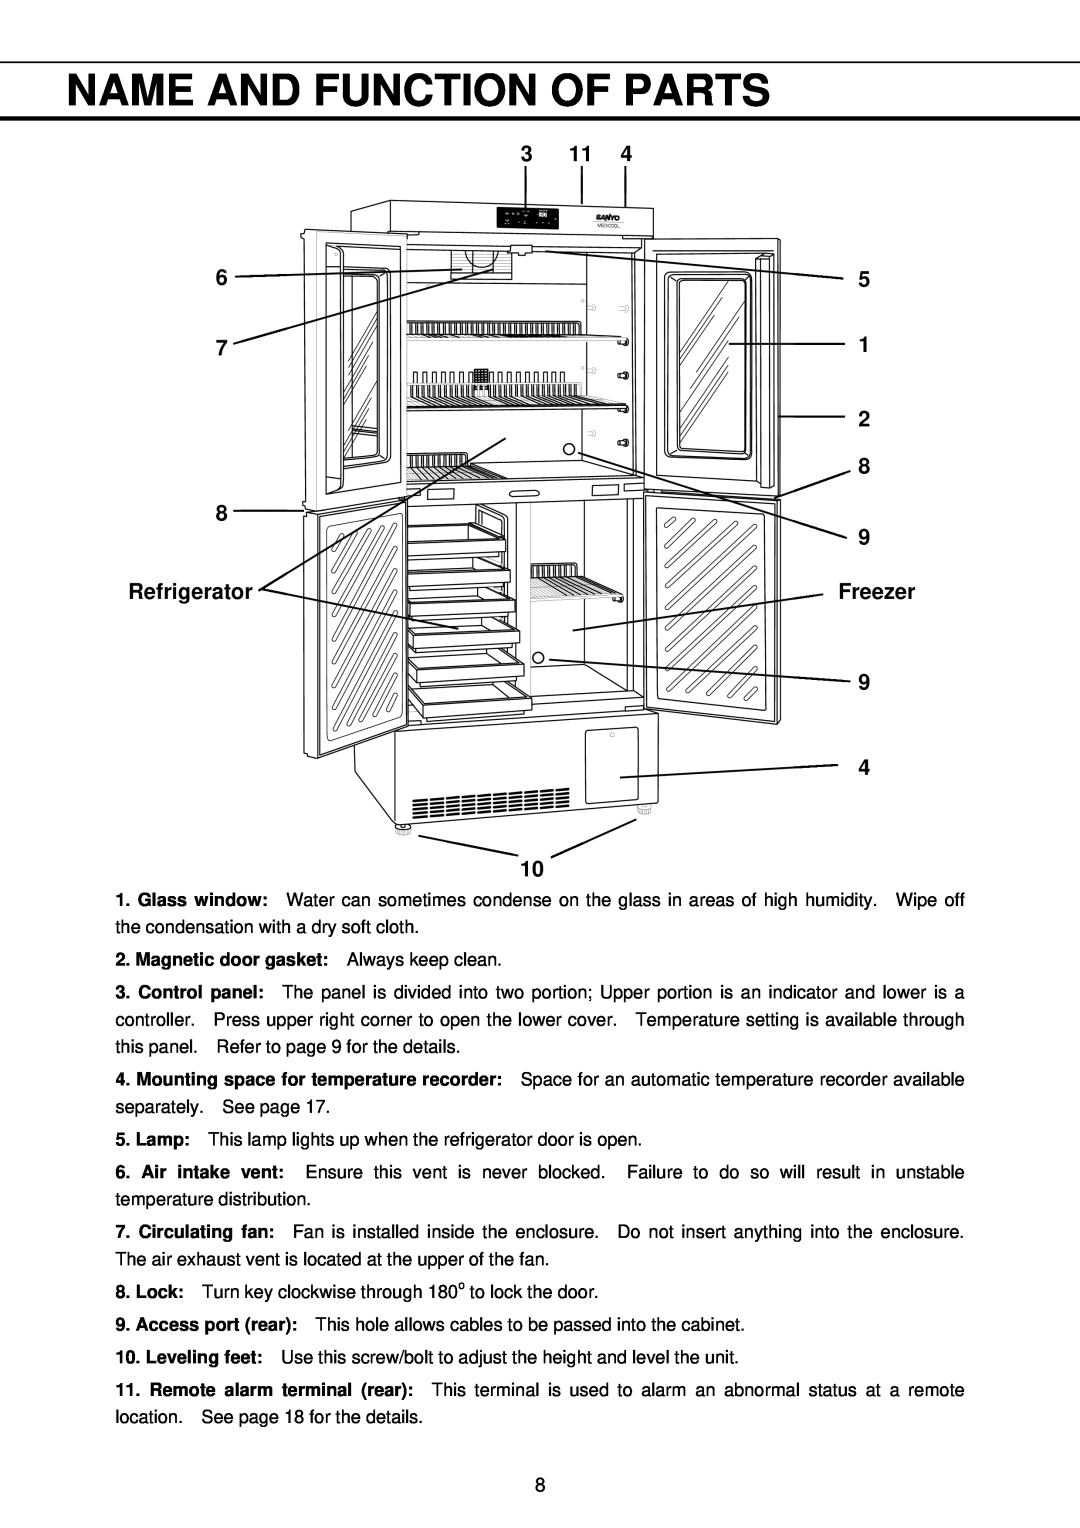 Sanyo MPR-411FR instruction manual Name And Function Of Parts, 6 7 8 Refrigerator, 3 11 5 1 2 8 9 Freezer 